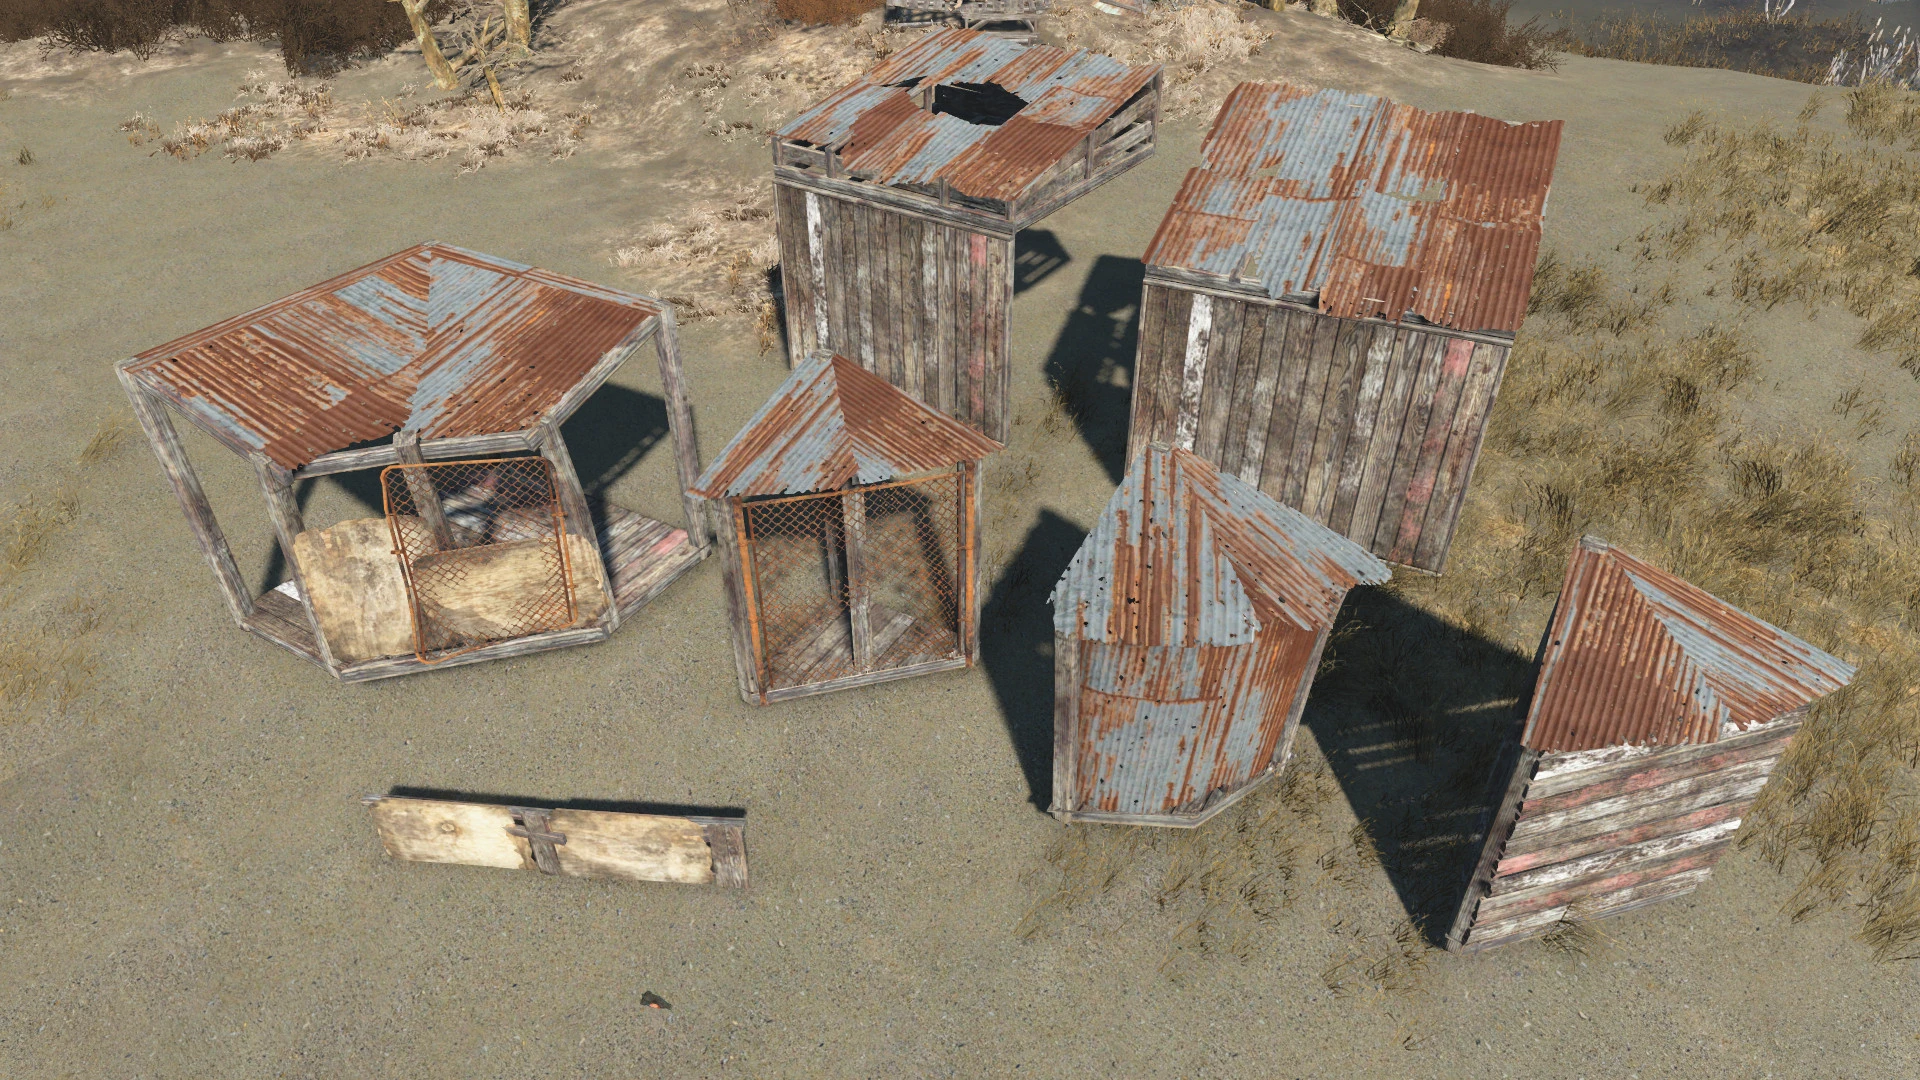 Settlement supplies expanded для fallout 4 фото 100